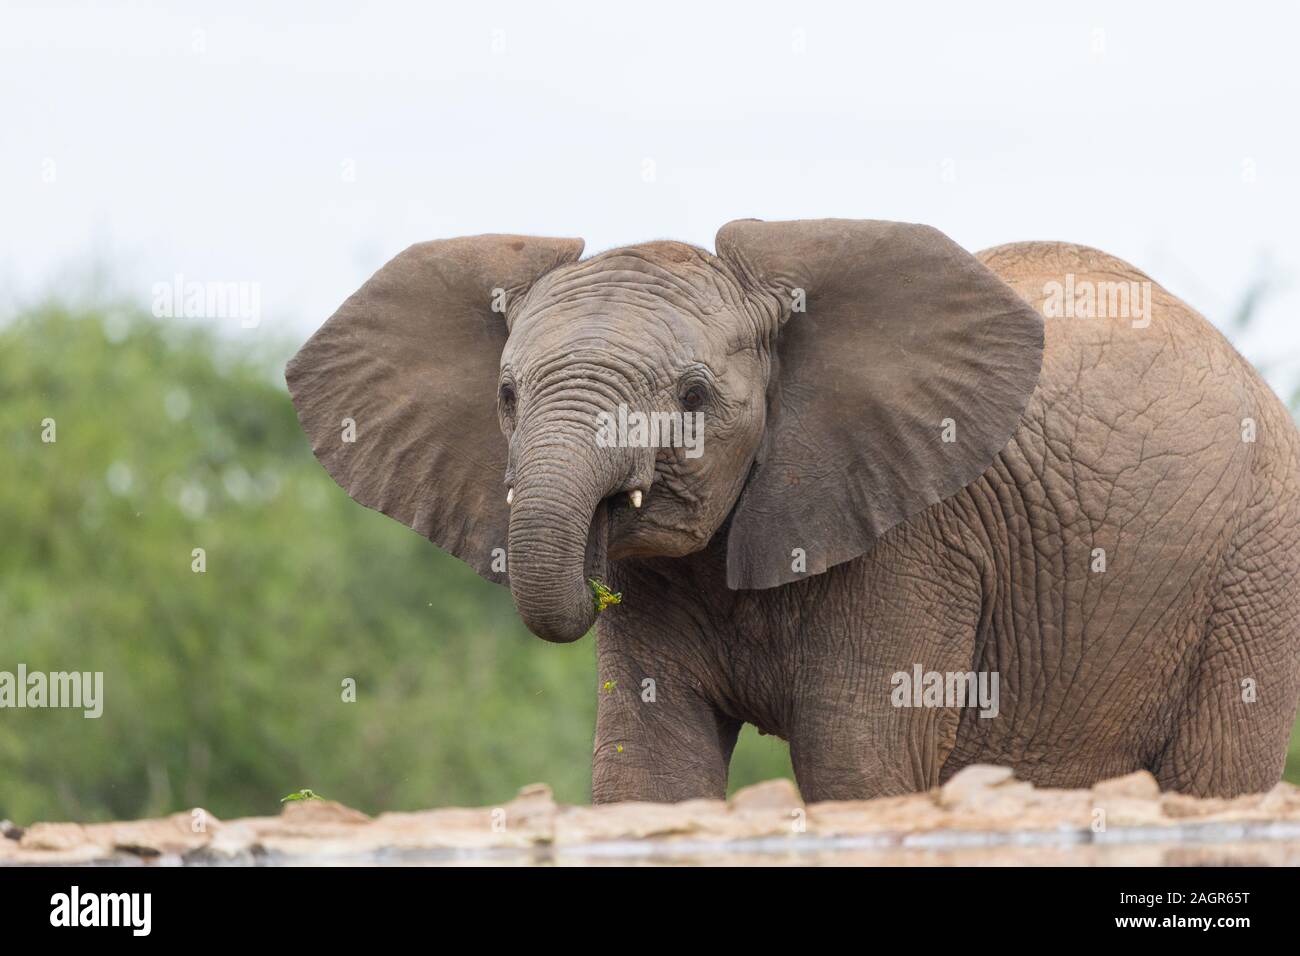 young or juvenile African elephant (Loxodonta africana) with a bit of greenery or vegetation in its trunk at Madikwe game reserve, South Africa Stock Photo